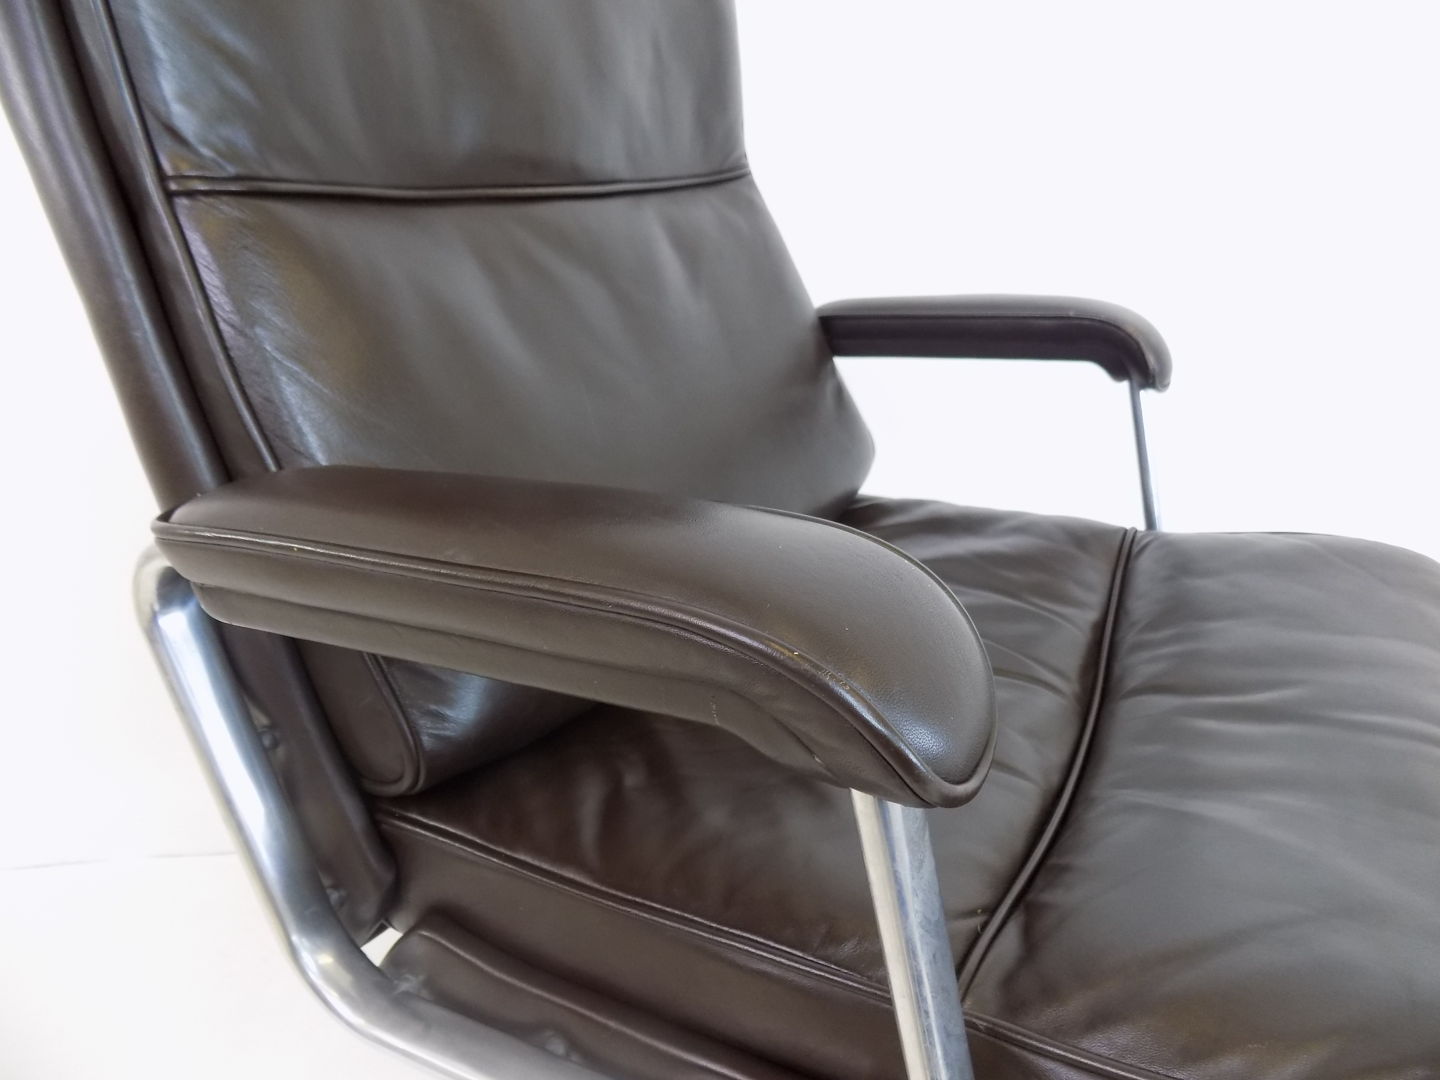 Drabert leather office chair